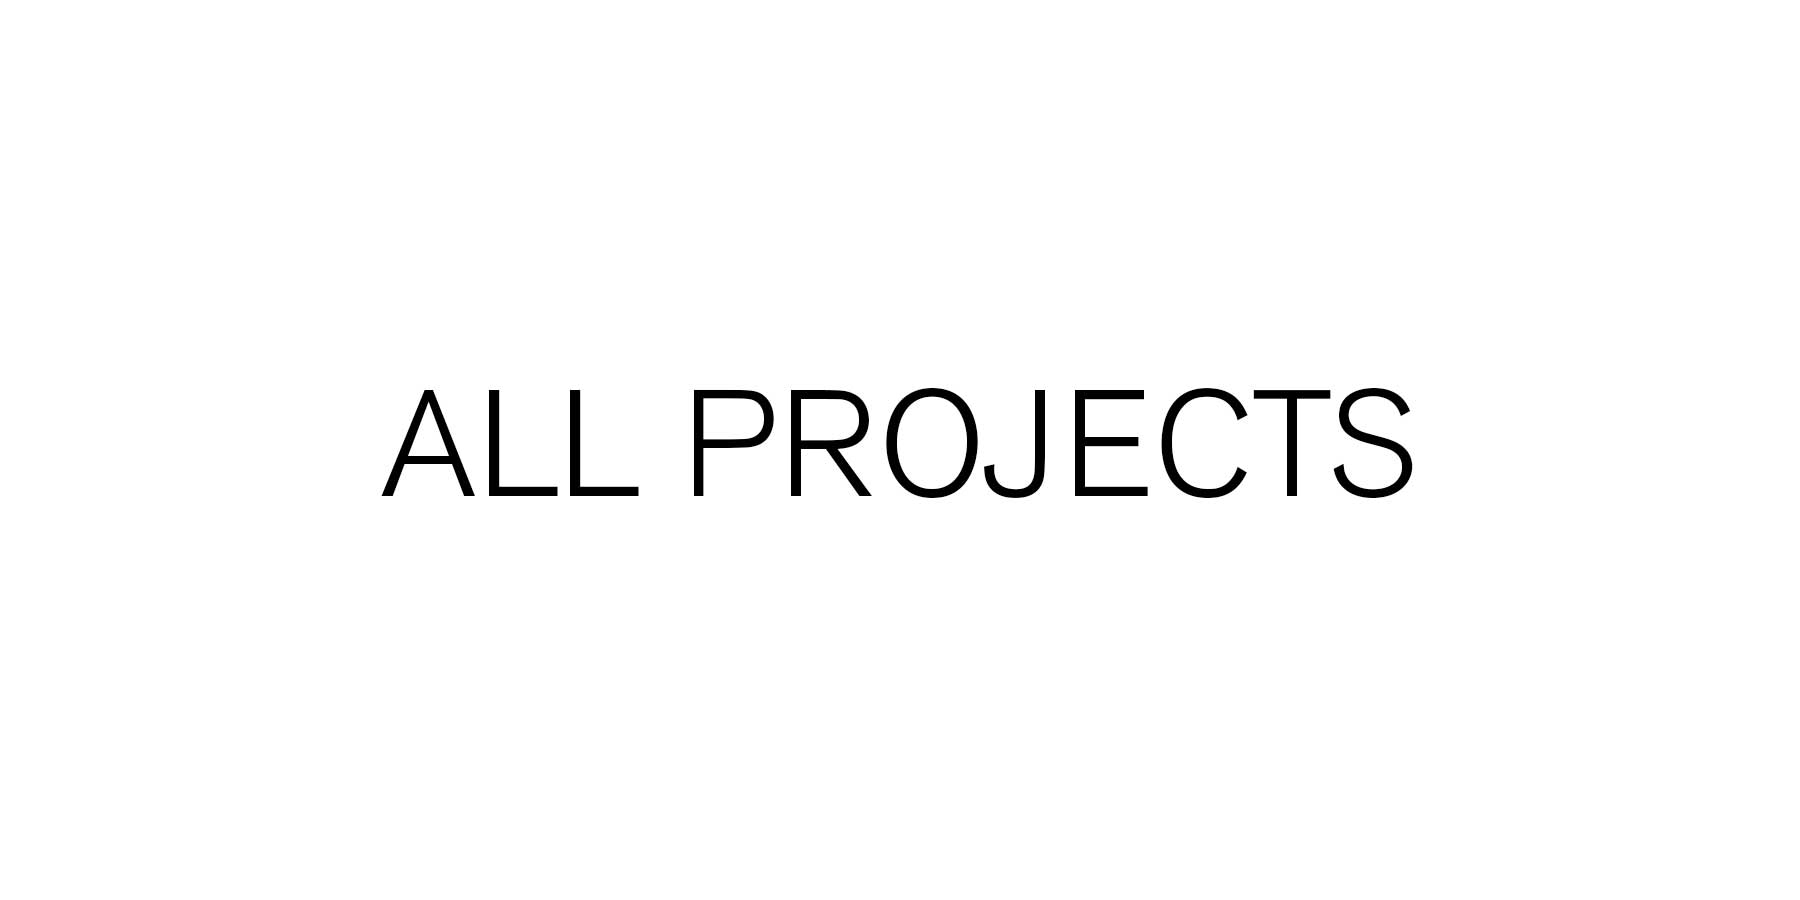 allprojects.jpg